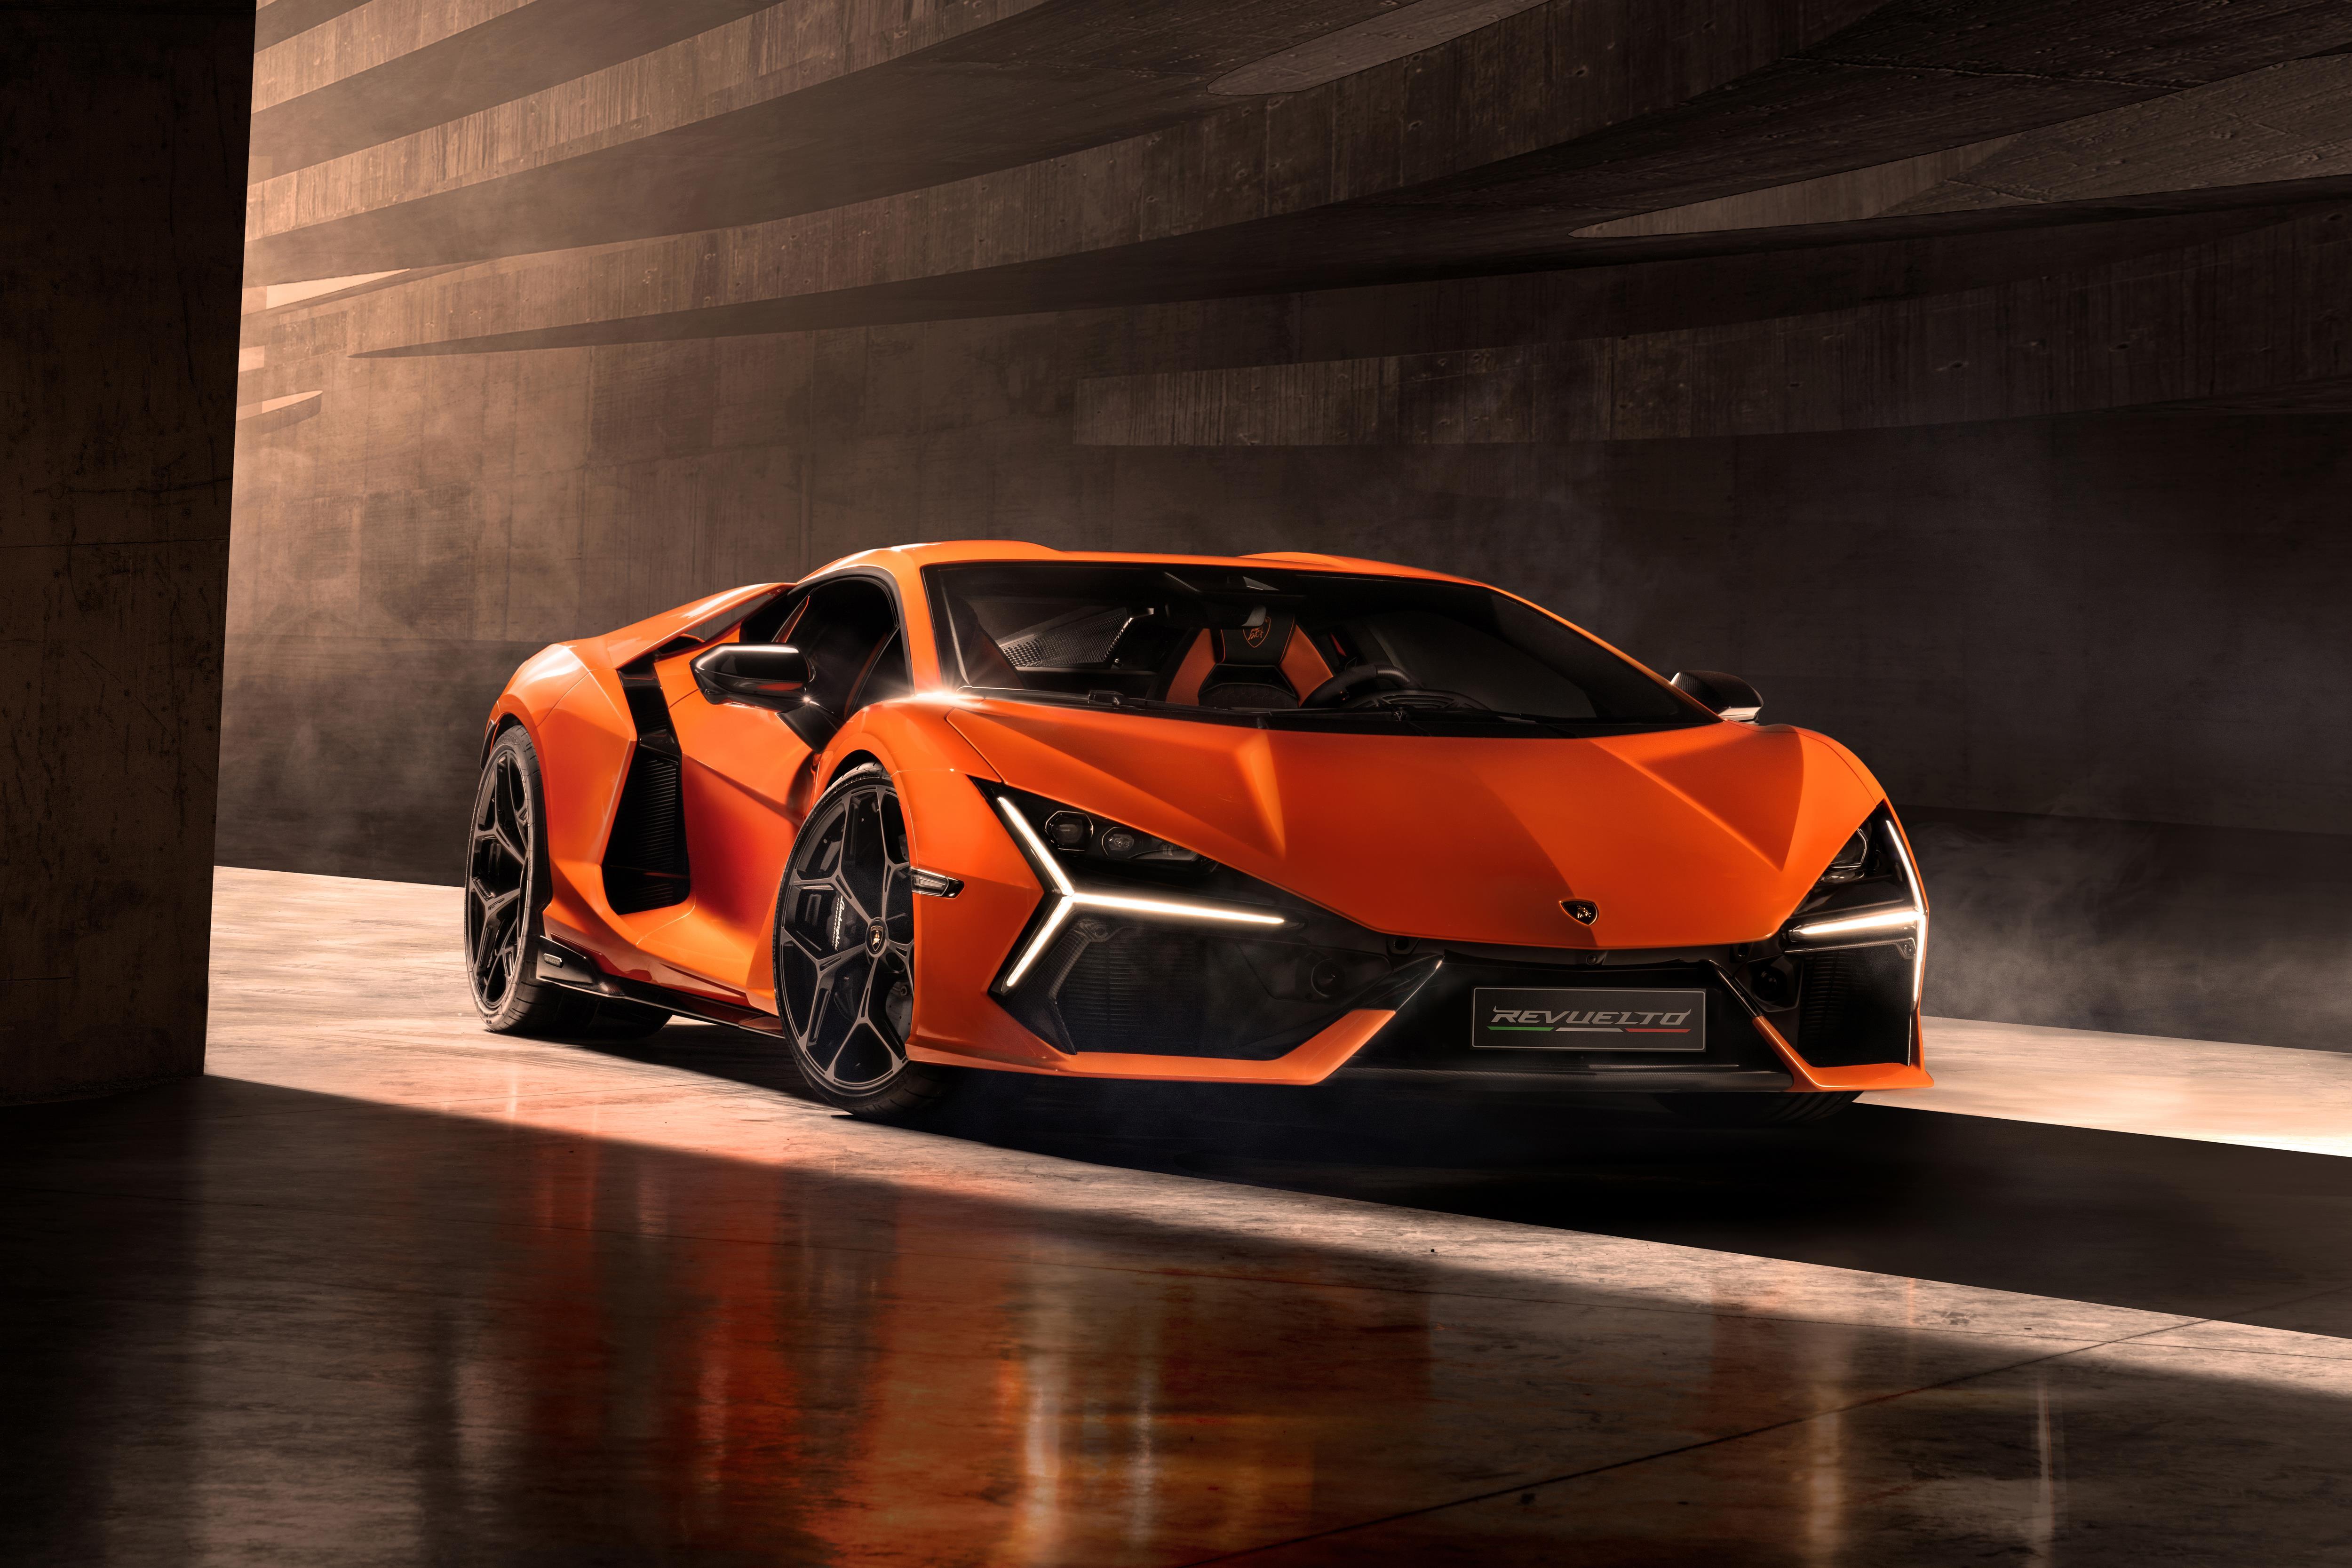 The Lamborghini Revuelto's all-electric mode will only get you six miles on the highway.